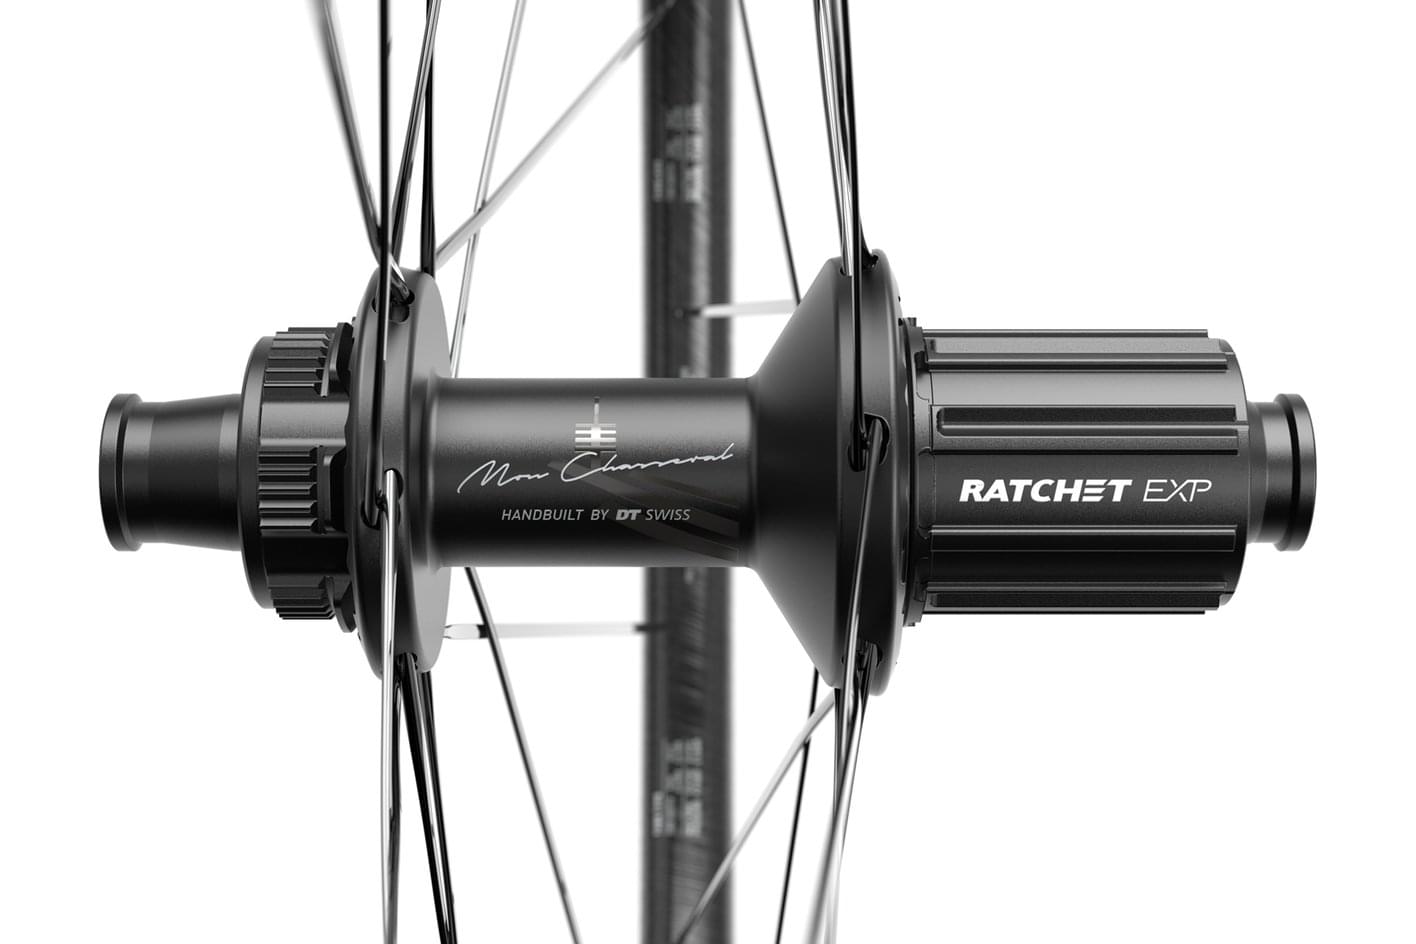 PRC 1100 DICUT Mon Chasseral - Lightest Road Cycling Wheels | DT Swiss